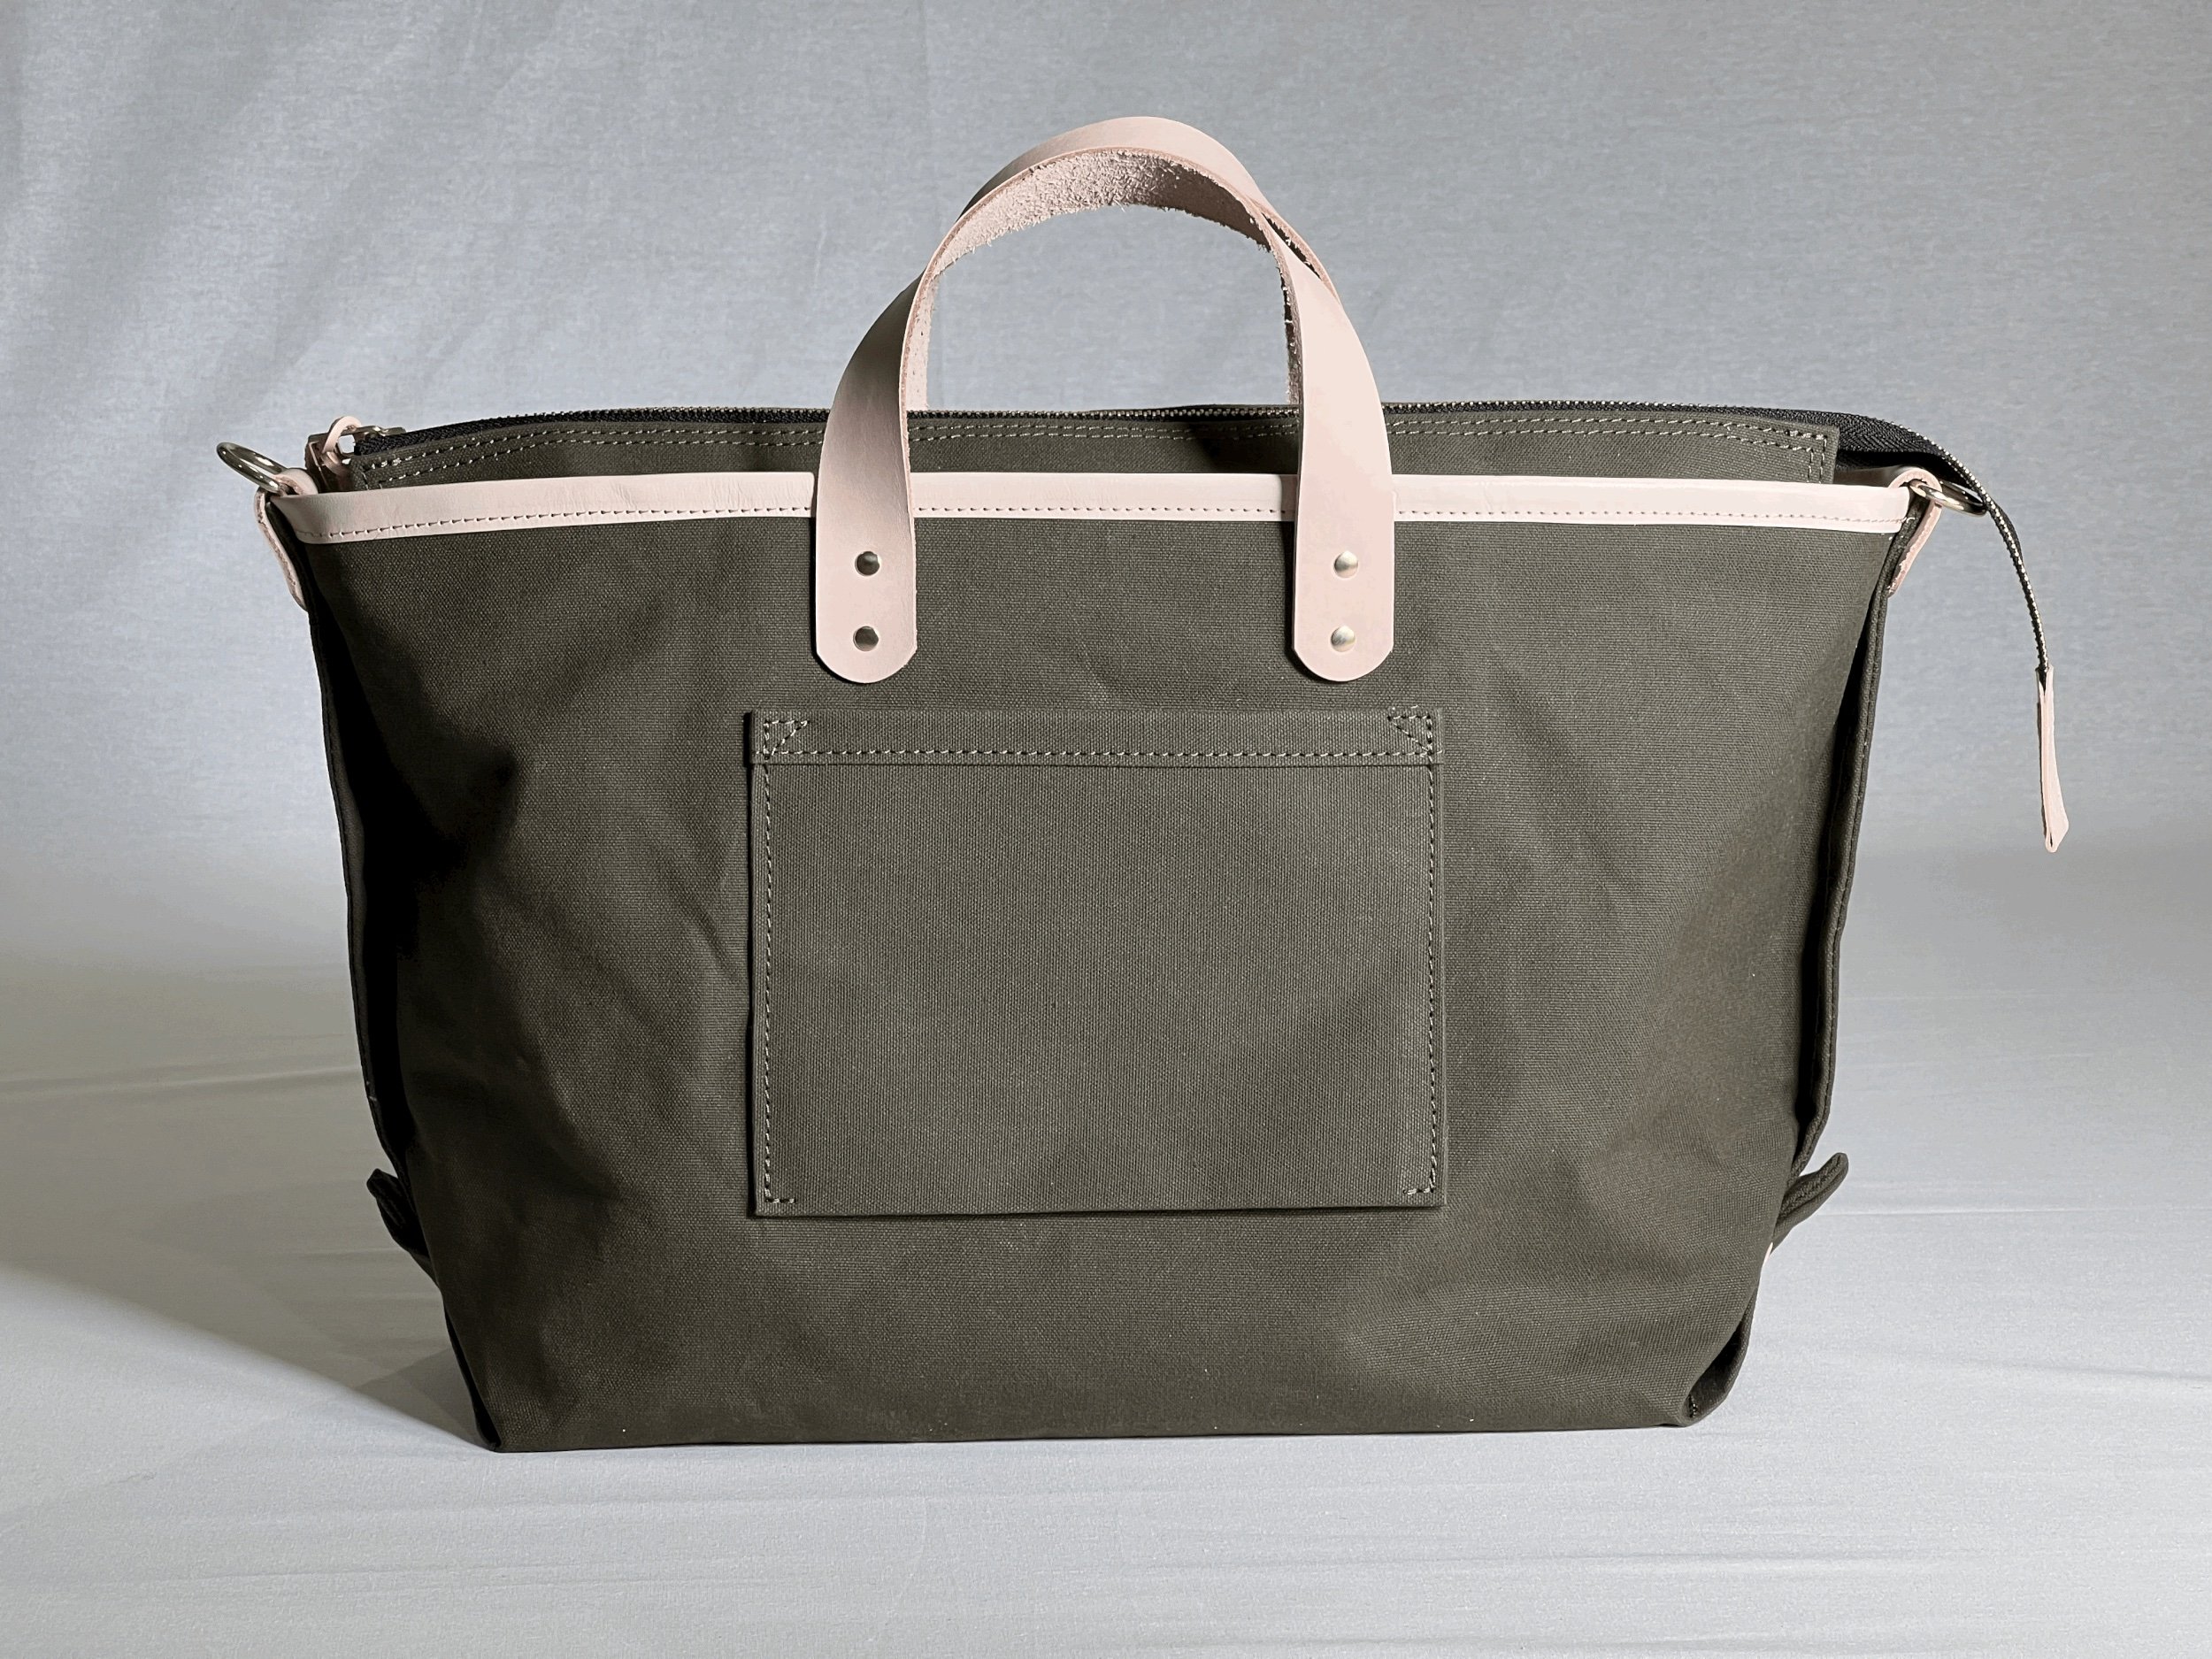 Transit Tote - Waxed Canvas — 1.61 Soft Goods